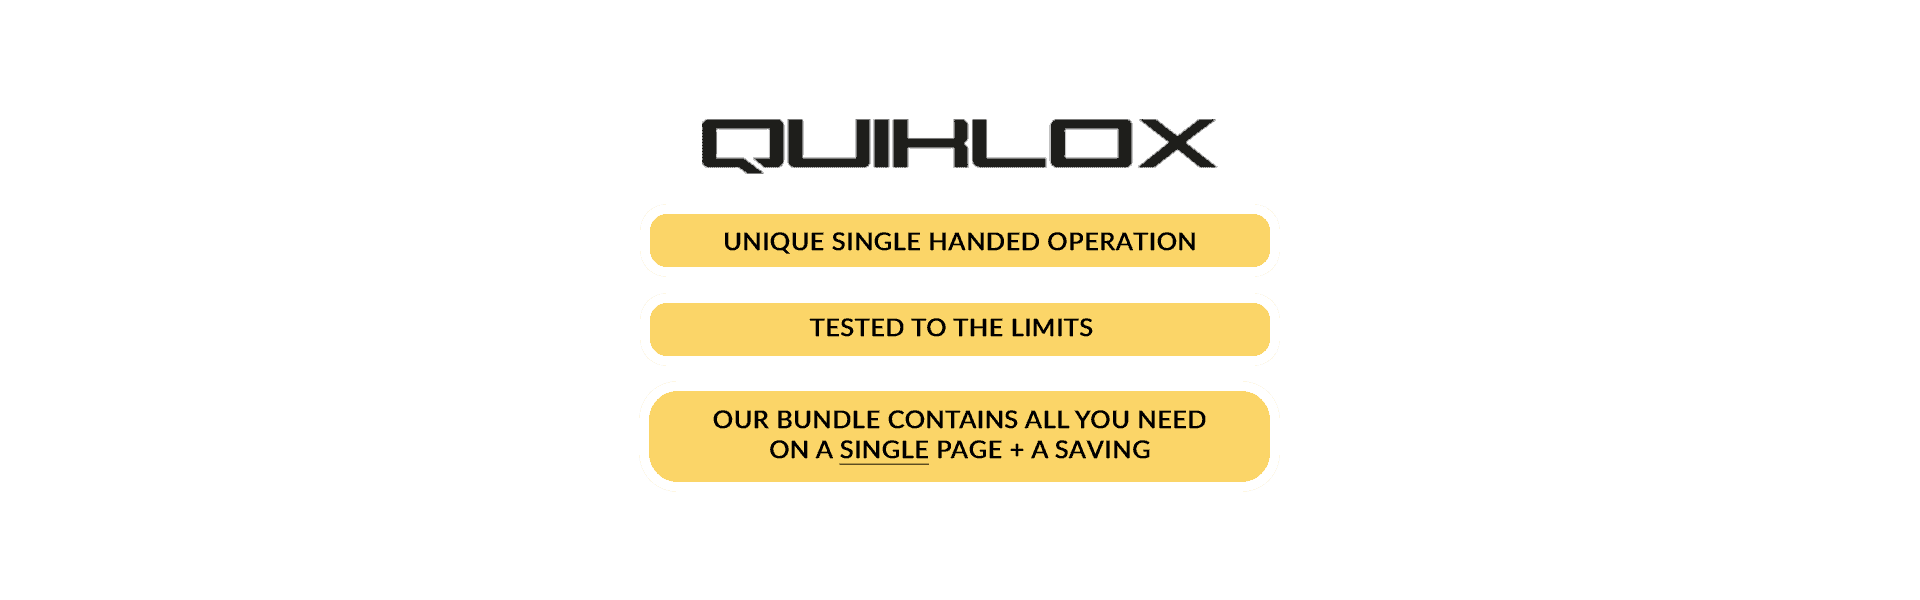 QuikLox iPhone Bundle: all you need on 1 page and a deal on the bundle